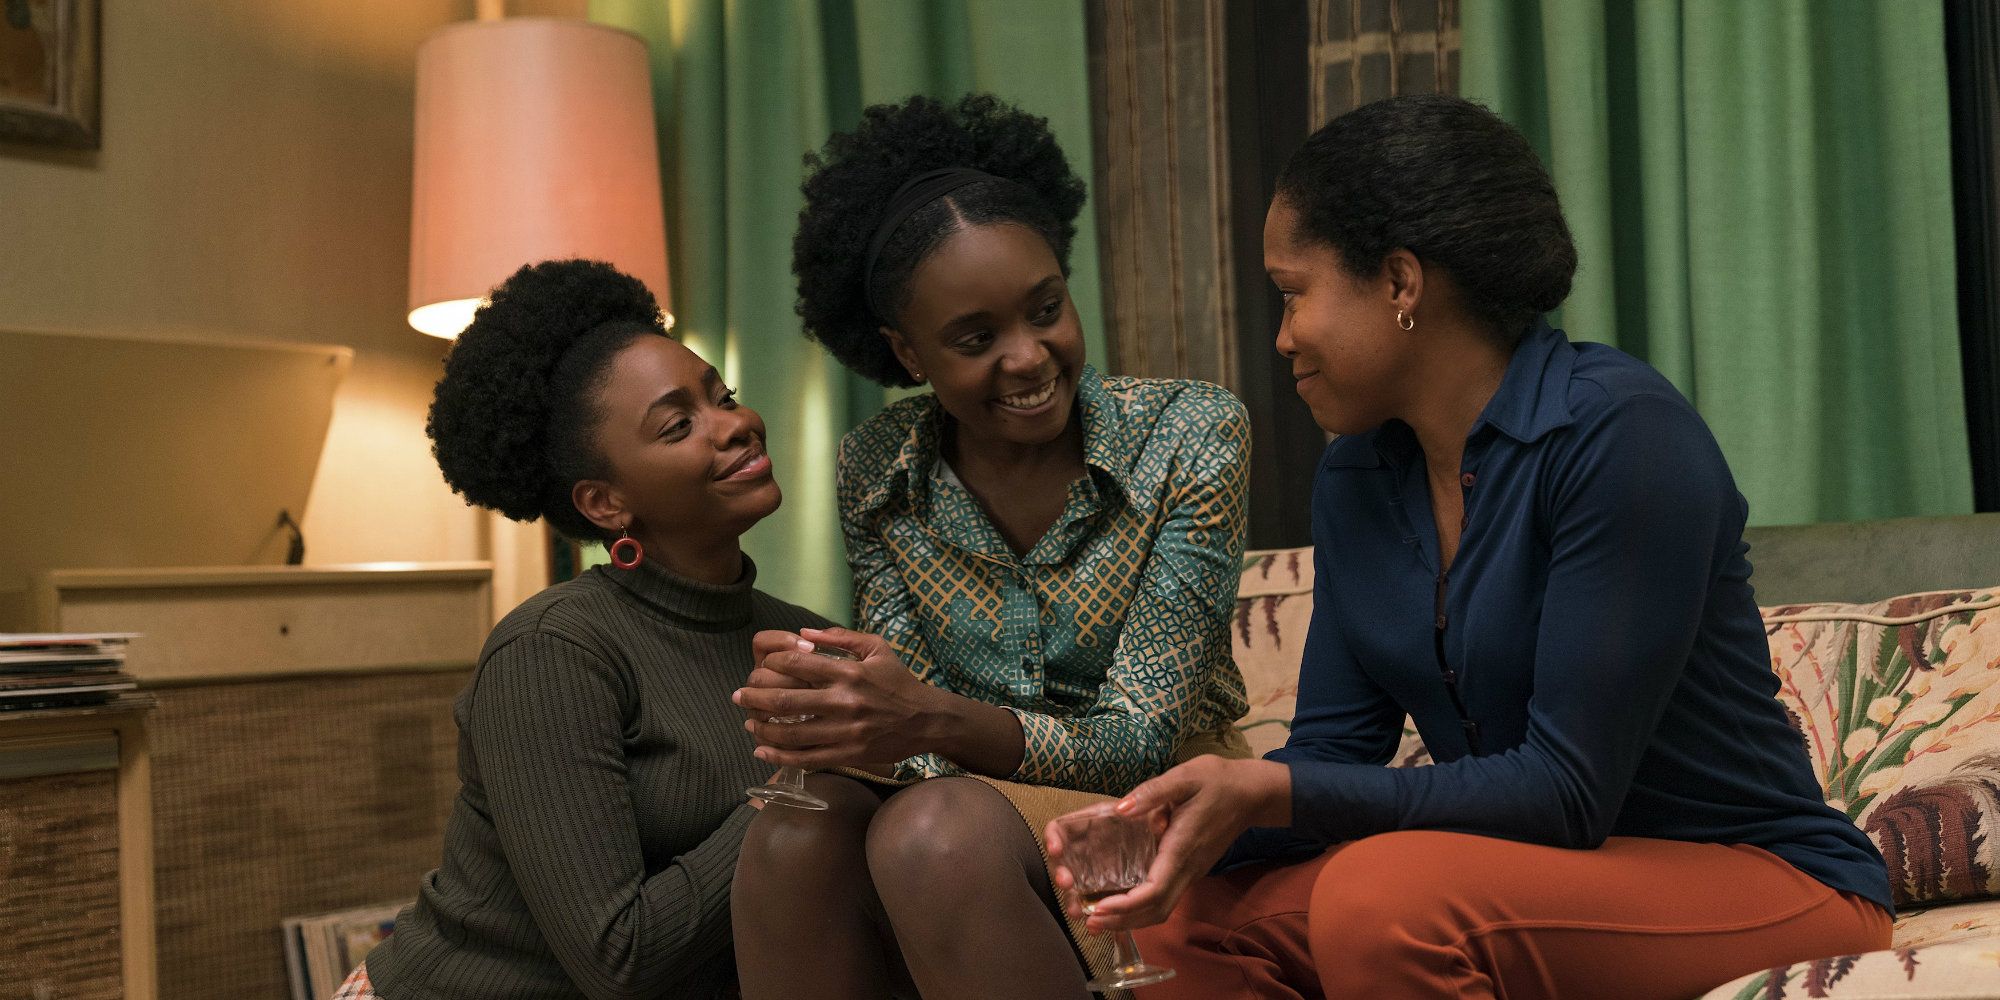 Tish, her sister, and Sharon on the couch smiling in If Beale Street Could Talk